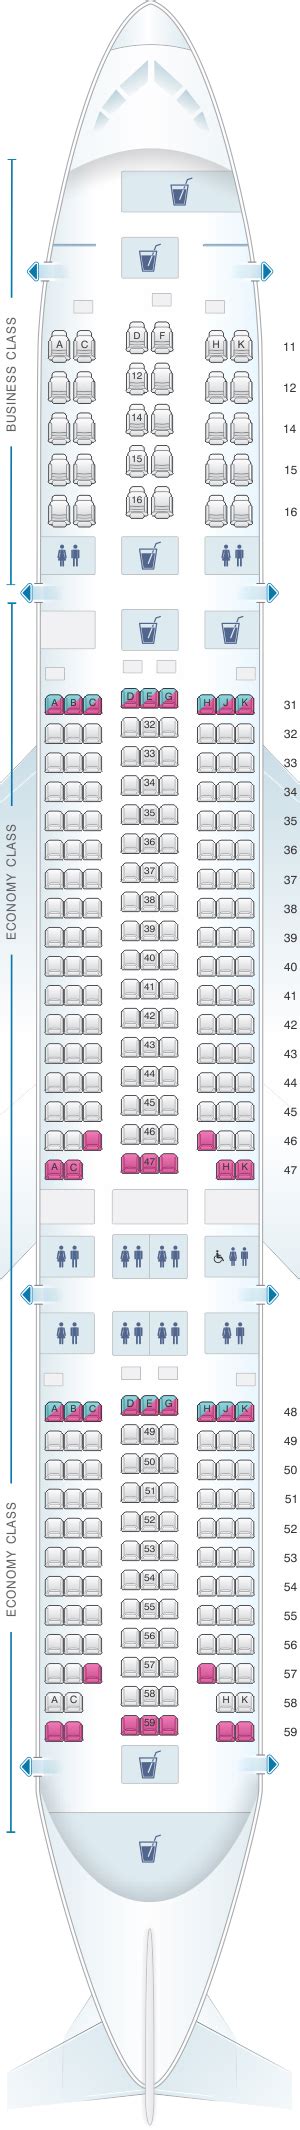 Boeing 787 9 Seating Map Singapore Airlines Elcho Table